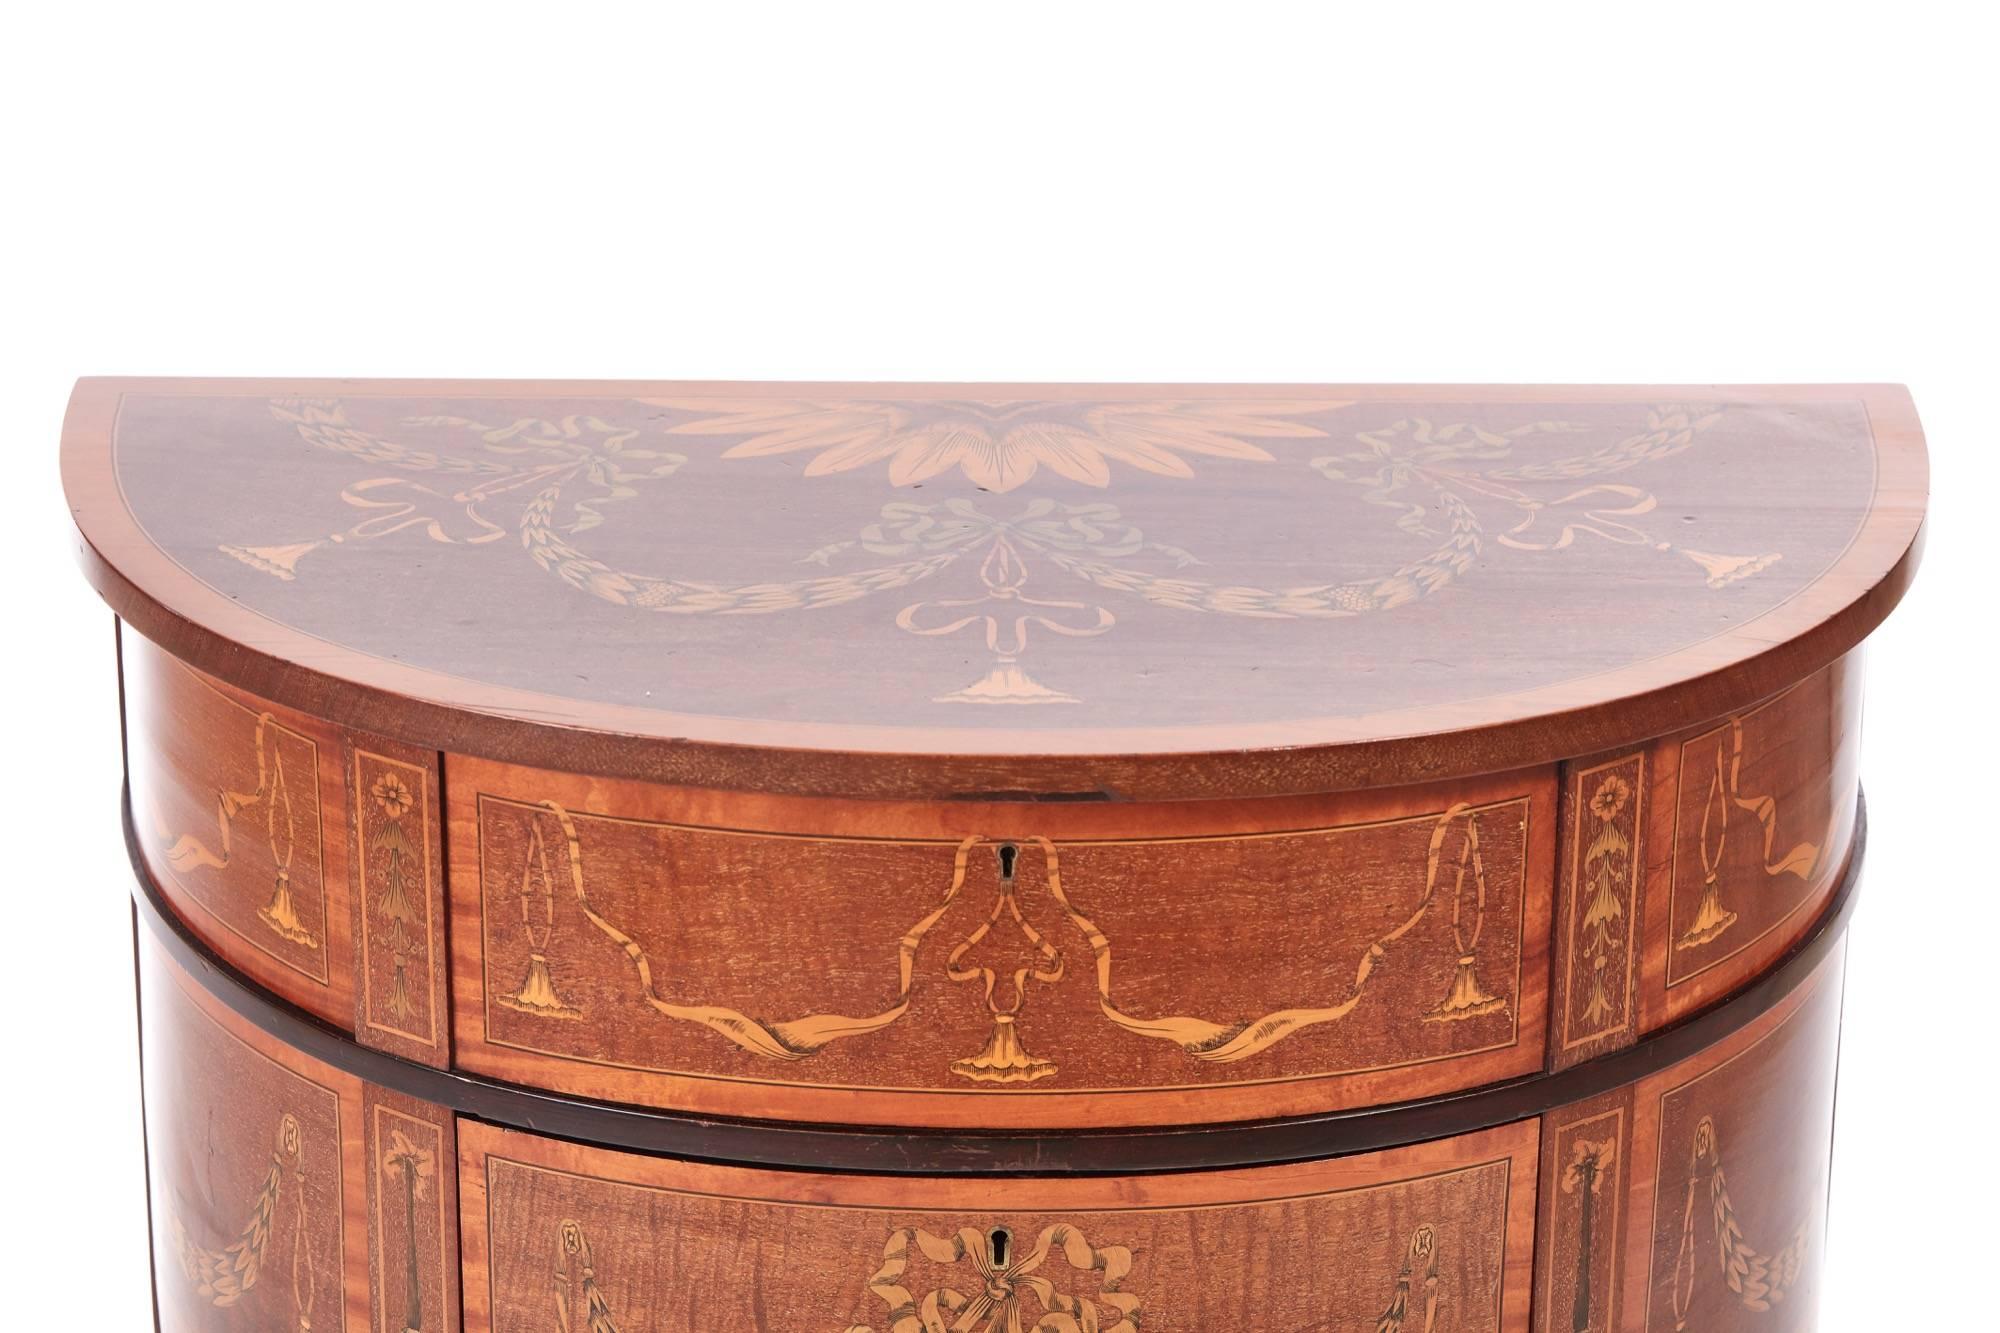 Unusual mahogany inlaid Edwardian demilune side table, having a fantastic marquetry lift up top with ribbon and swags inlaid detail, cross banded in satinwood, the frieze again inlaid with ribbon and swag, supported on elegant inlaid square tapering